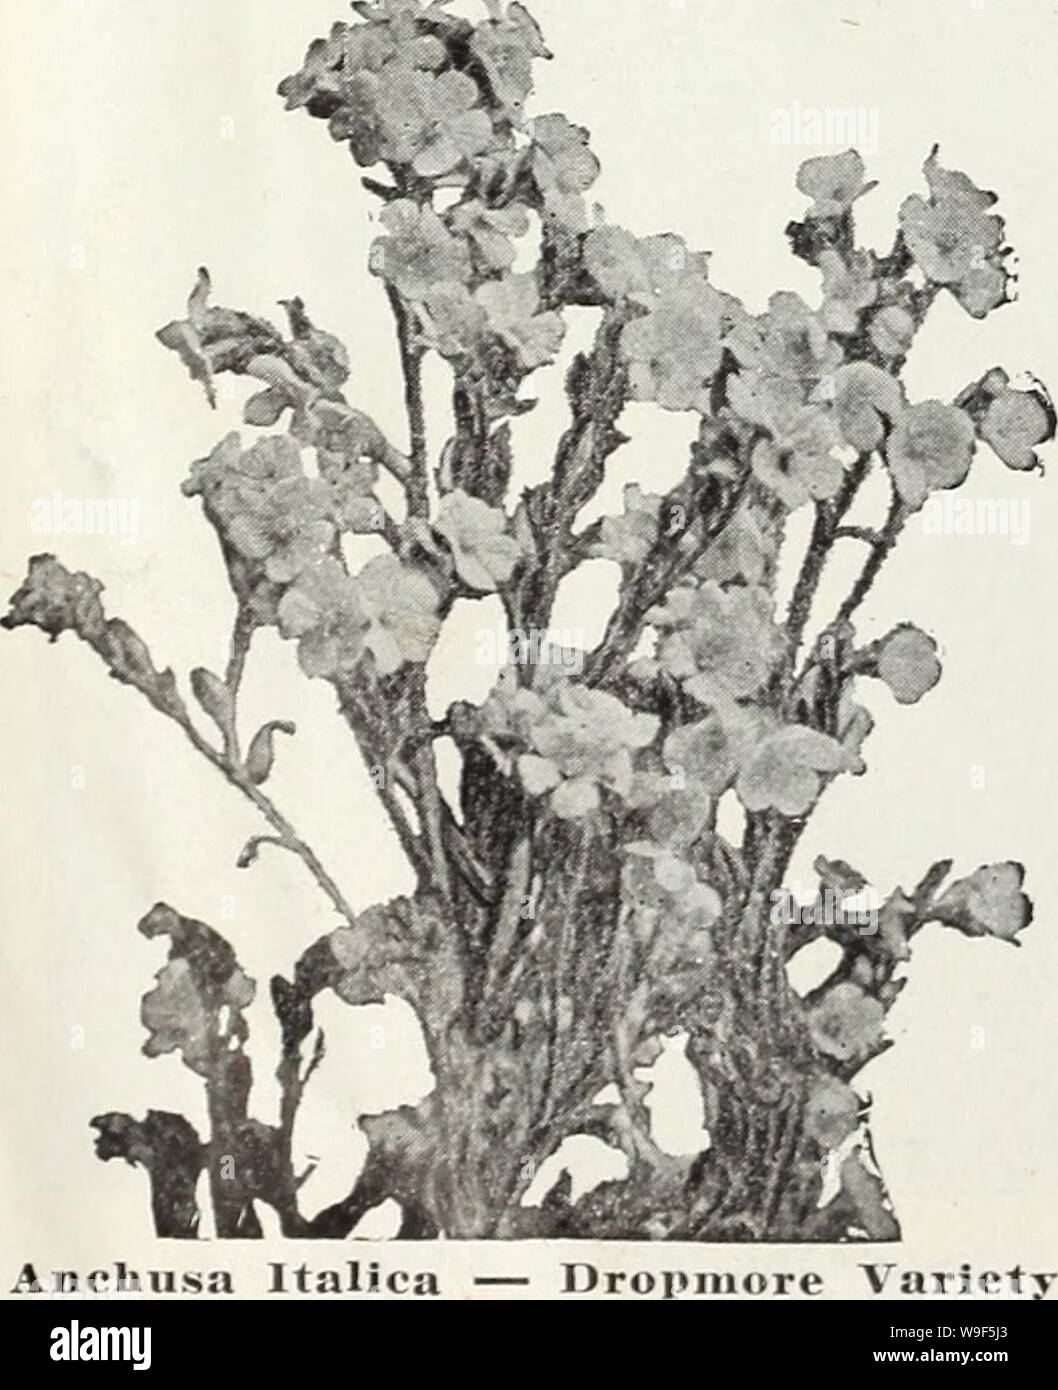 Archive image from page 17 of Currie's bulbs and plants . Currie's bulbs and plants : autumn 1928  curriesbulbsplan19curr Year: 1928 ( ACHILLEA (Milfoil or Yarrow) Bears dense heads of pink flowers all Flowers double white, borne in Millefolium Rosea summer. Ptanuica fl. pi. 'The Pearl' — great profusion all season. Price, each, 25c; per dozen, $2.50. Antheiiiis Tinctoria ACONITU31 (3Ioukshood) Summer and fall flowering- hardy plants with bold spikes of hood-shaped flowers, thriving either in sun or shade. Fischeri — Flowers very large, pale blue, 18 inches. Price, each, S5c; per doz., $3.50. Stock Photo